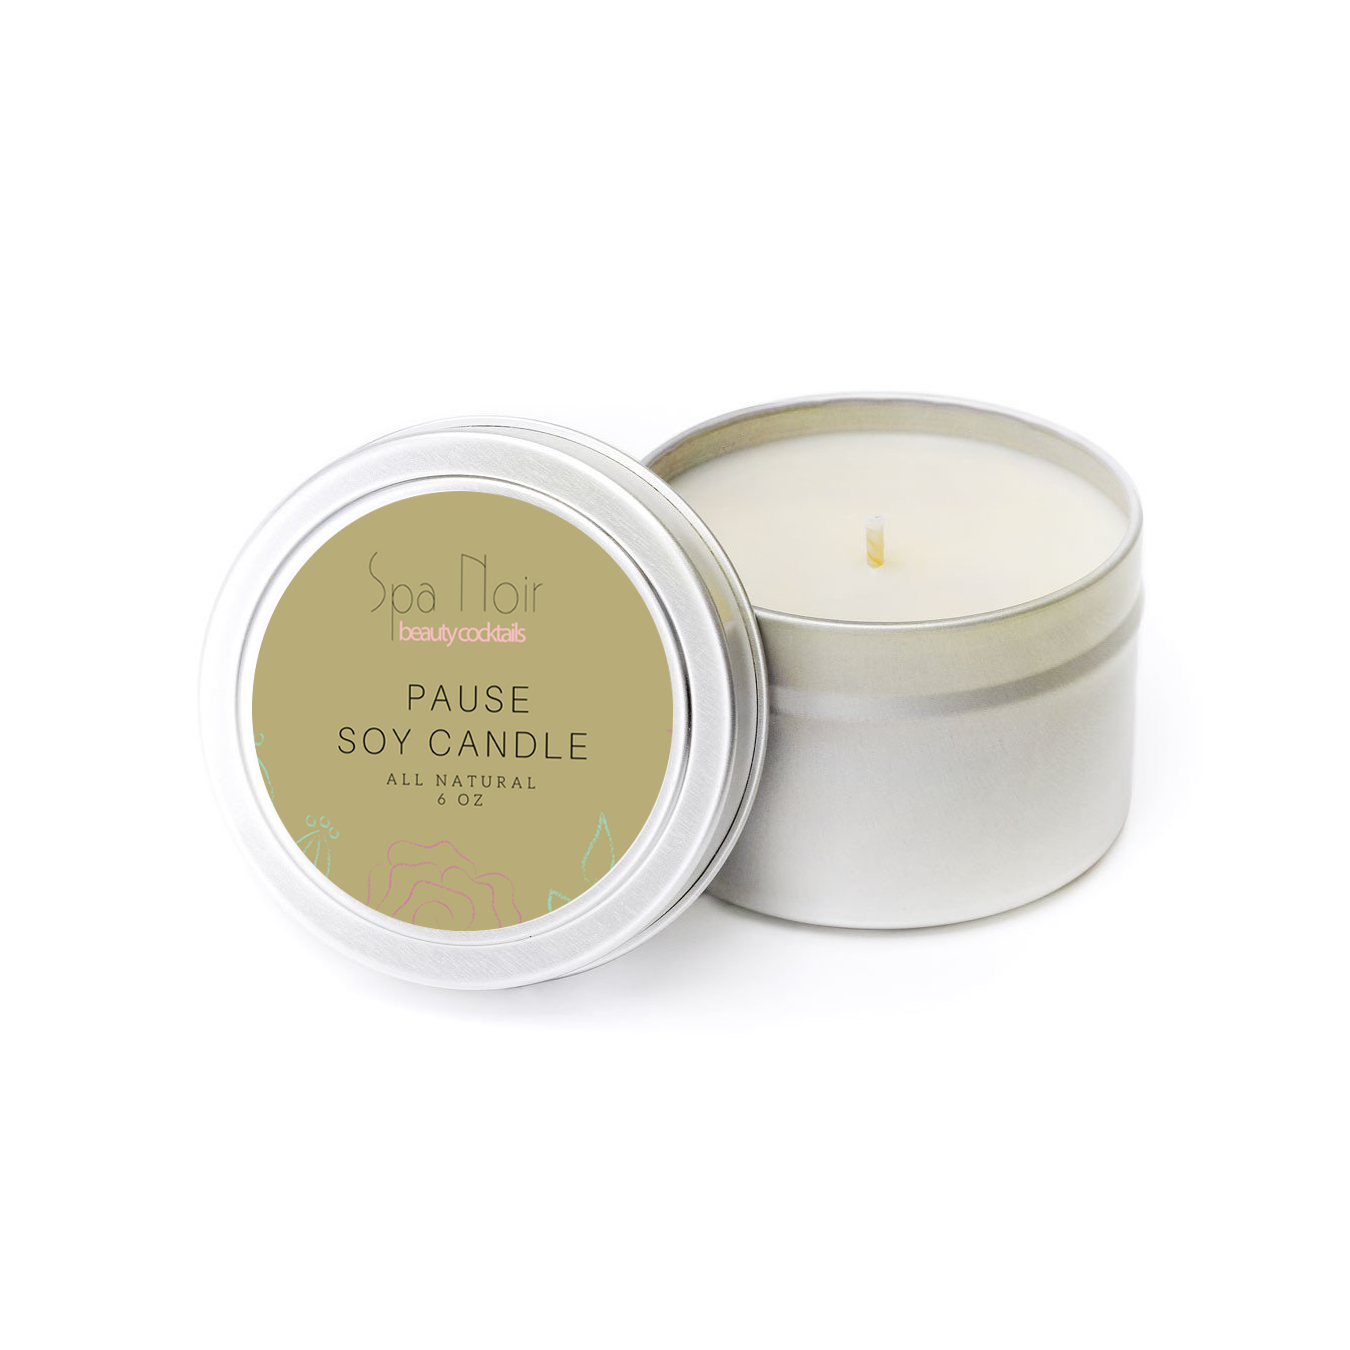 Pause Aromatherapy Candle - spa-noir